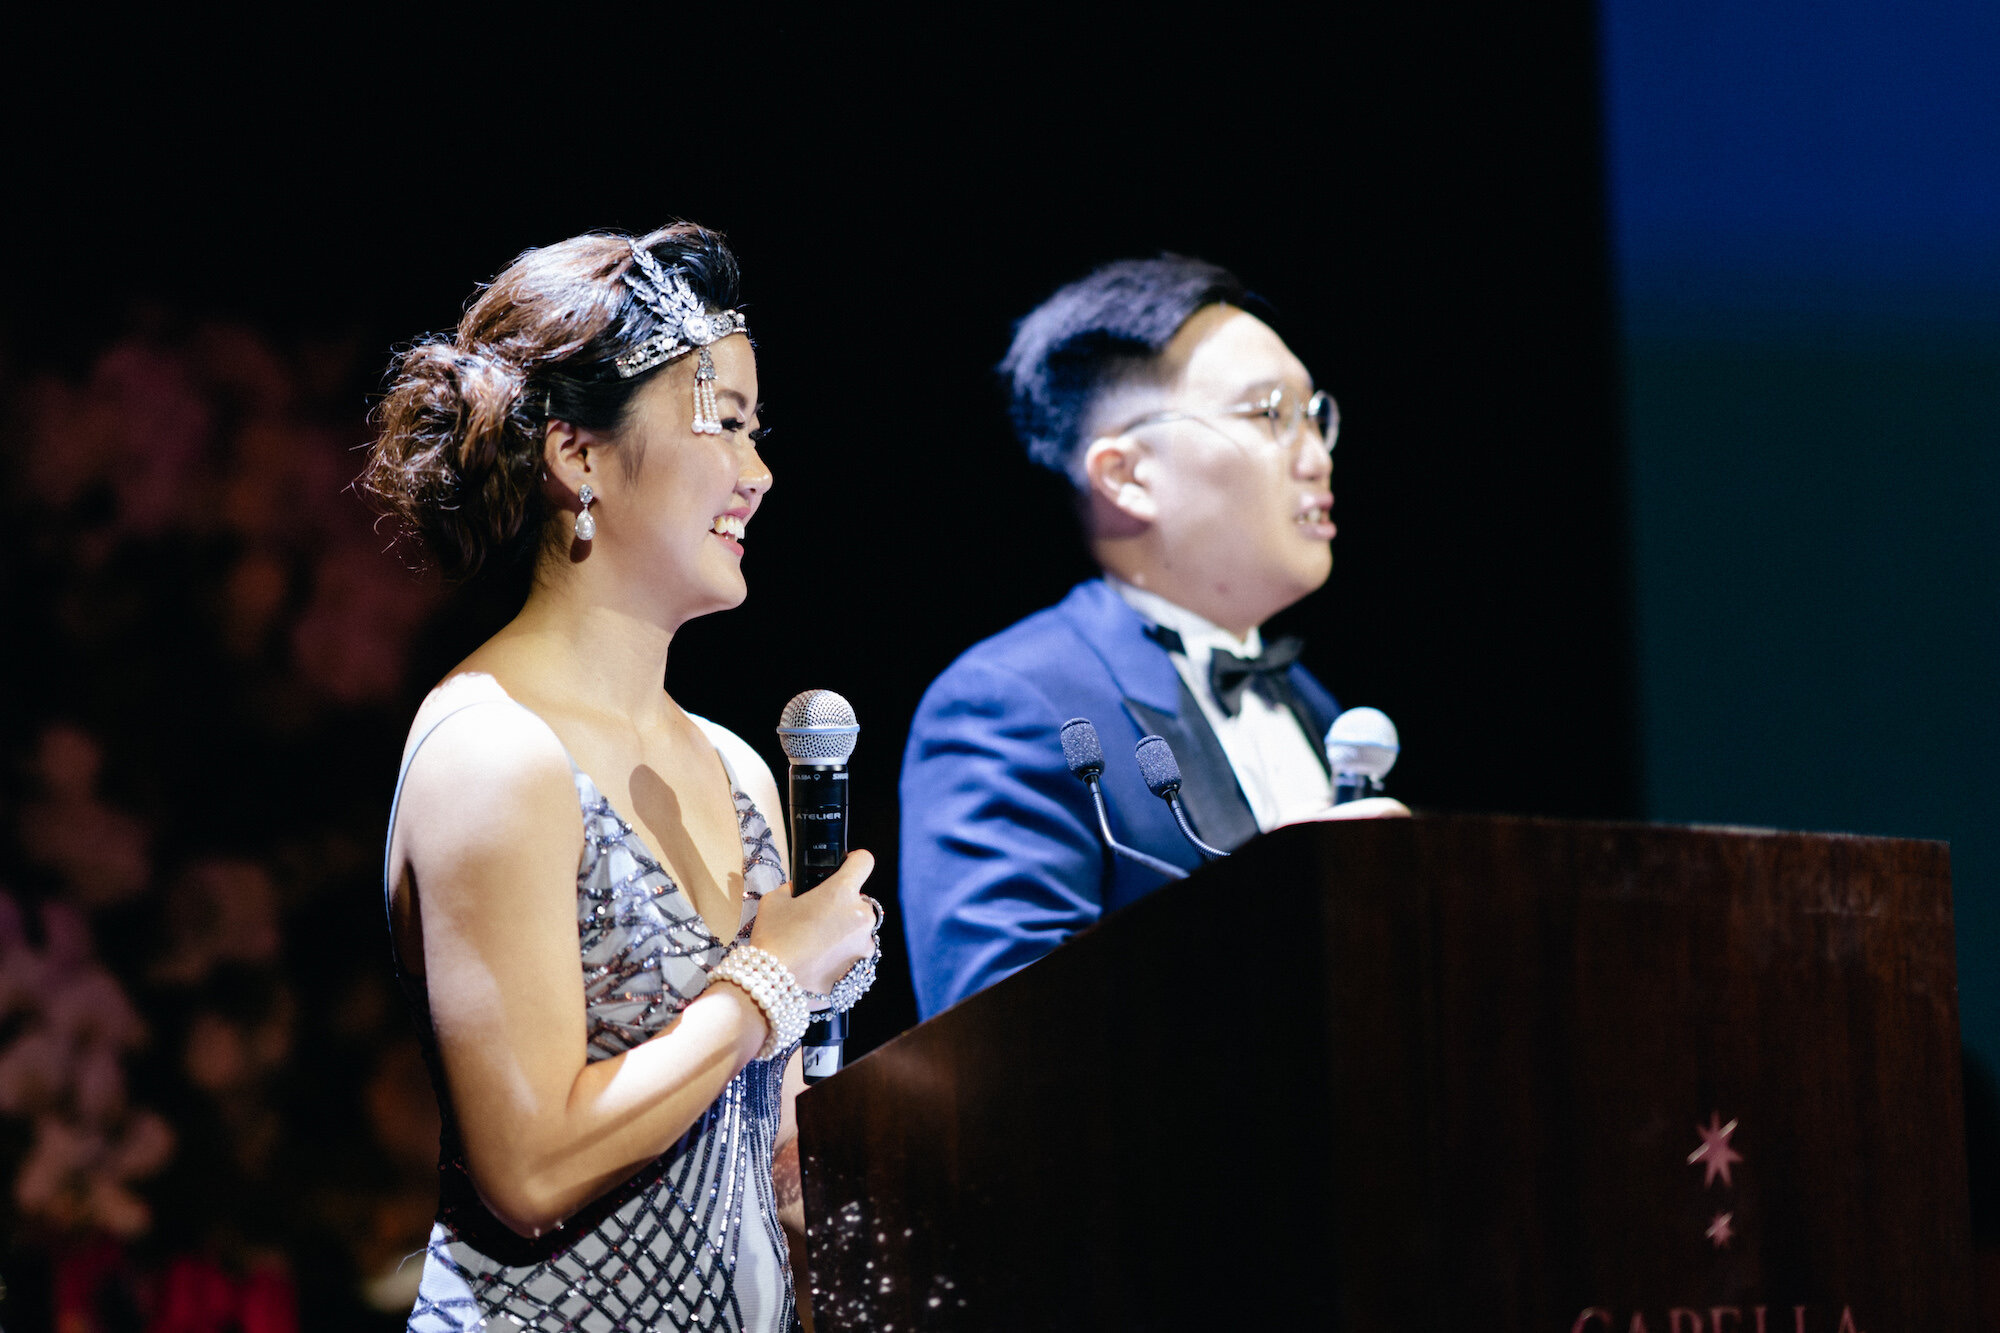 20191026_Lyn and Ming Xian_Capella Singapore (238 of 398).JPG